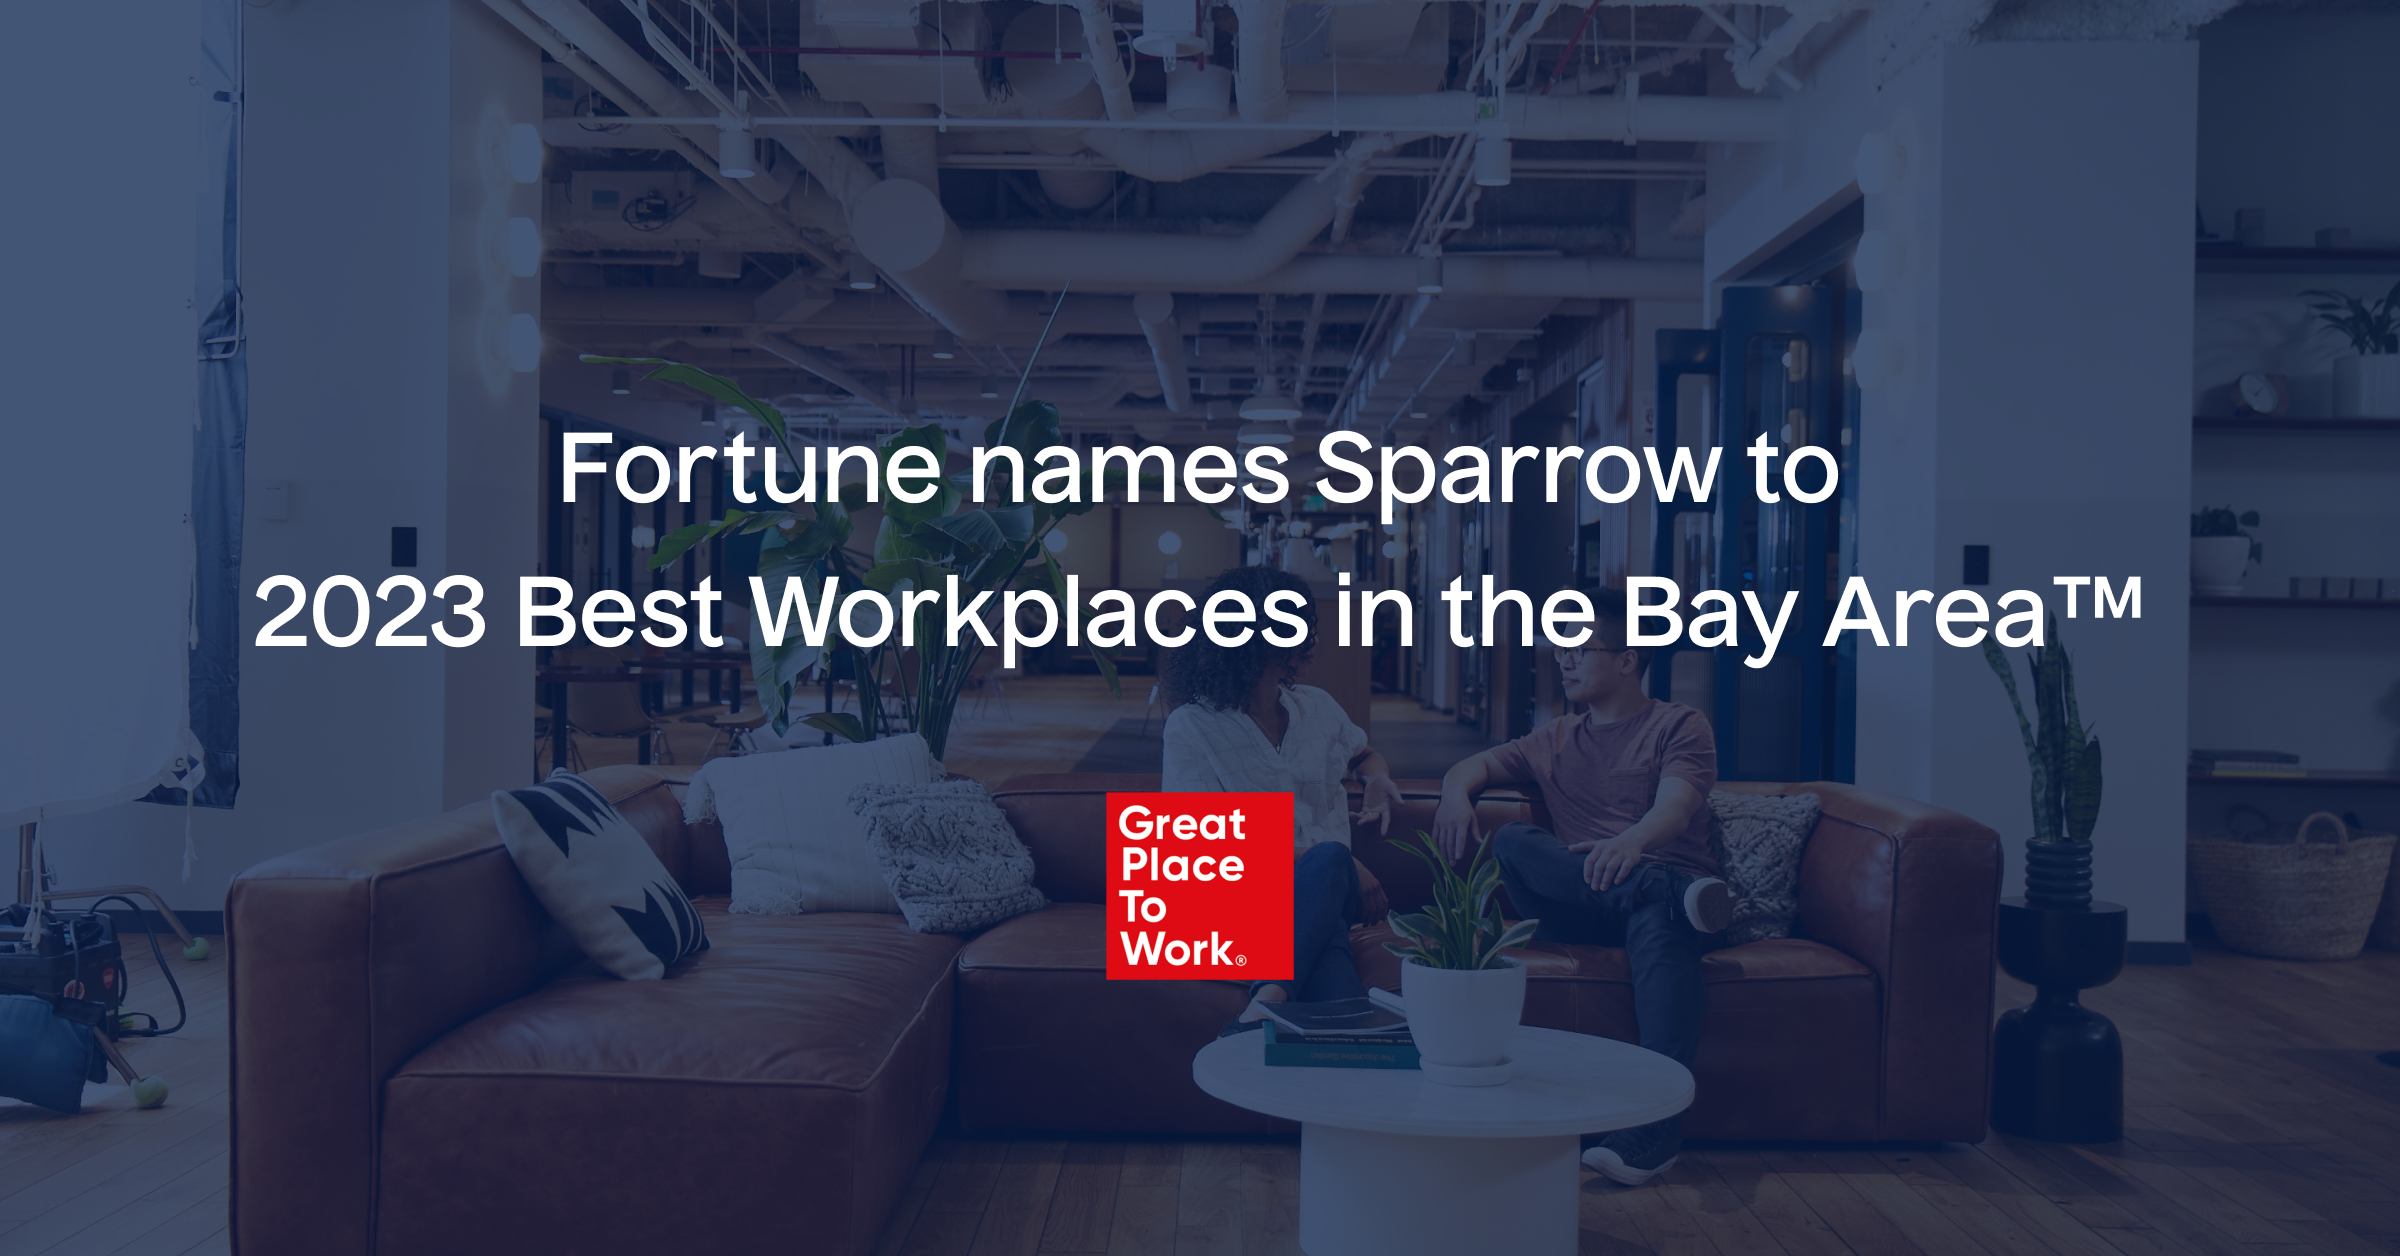 Great Place To Work® and Fortune magazine have honored Sparrow as one of this year’s Best Workplaces in the Bay Area.